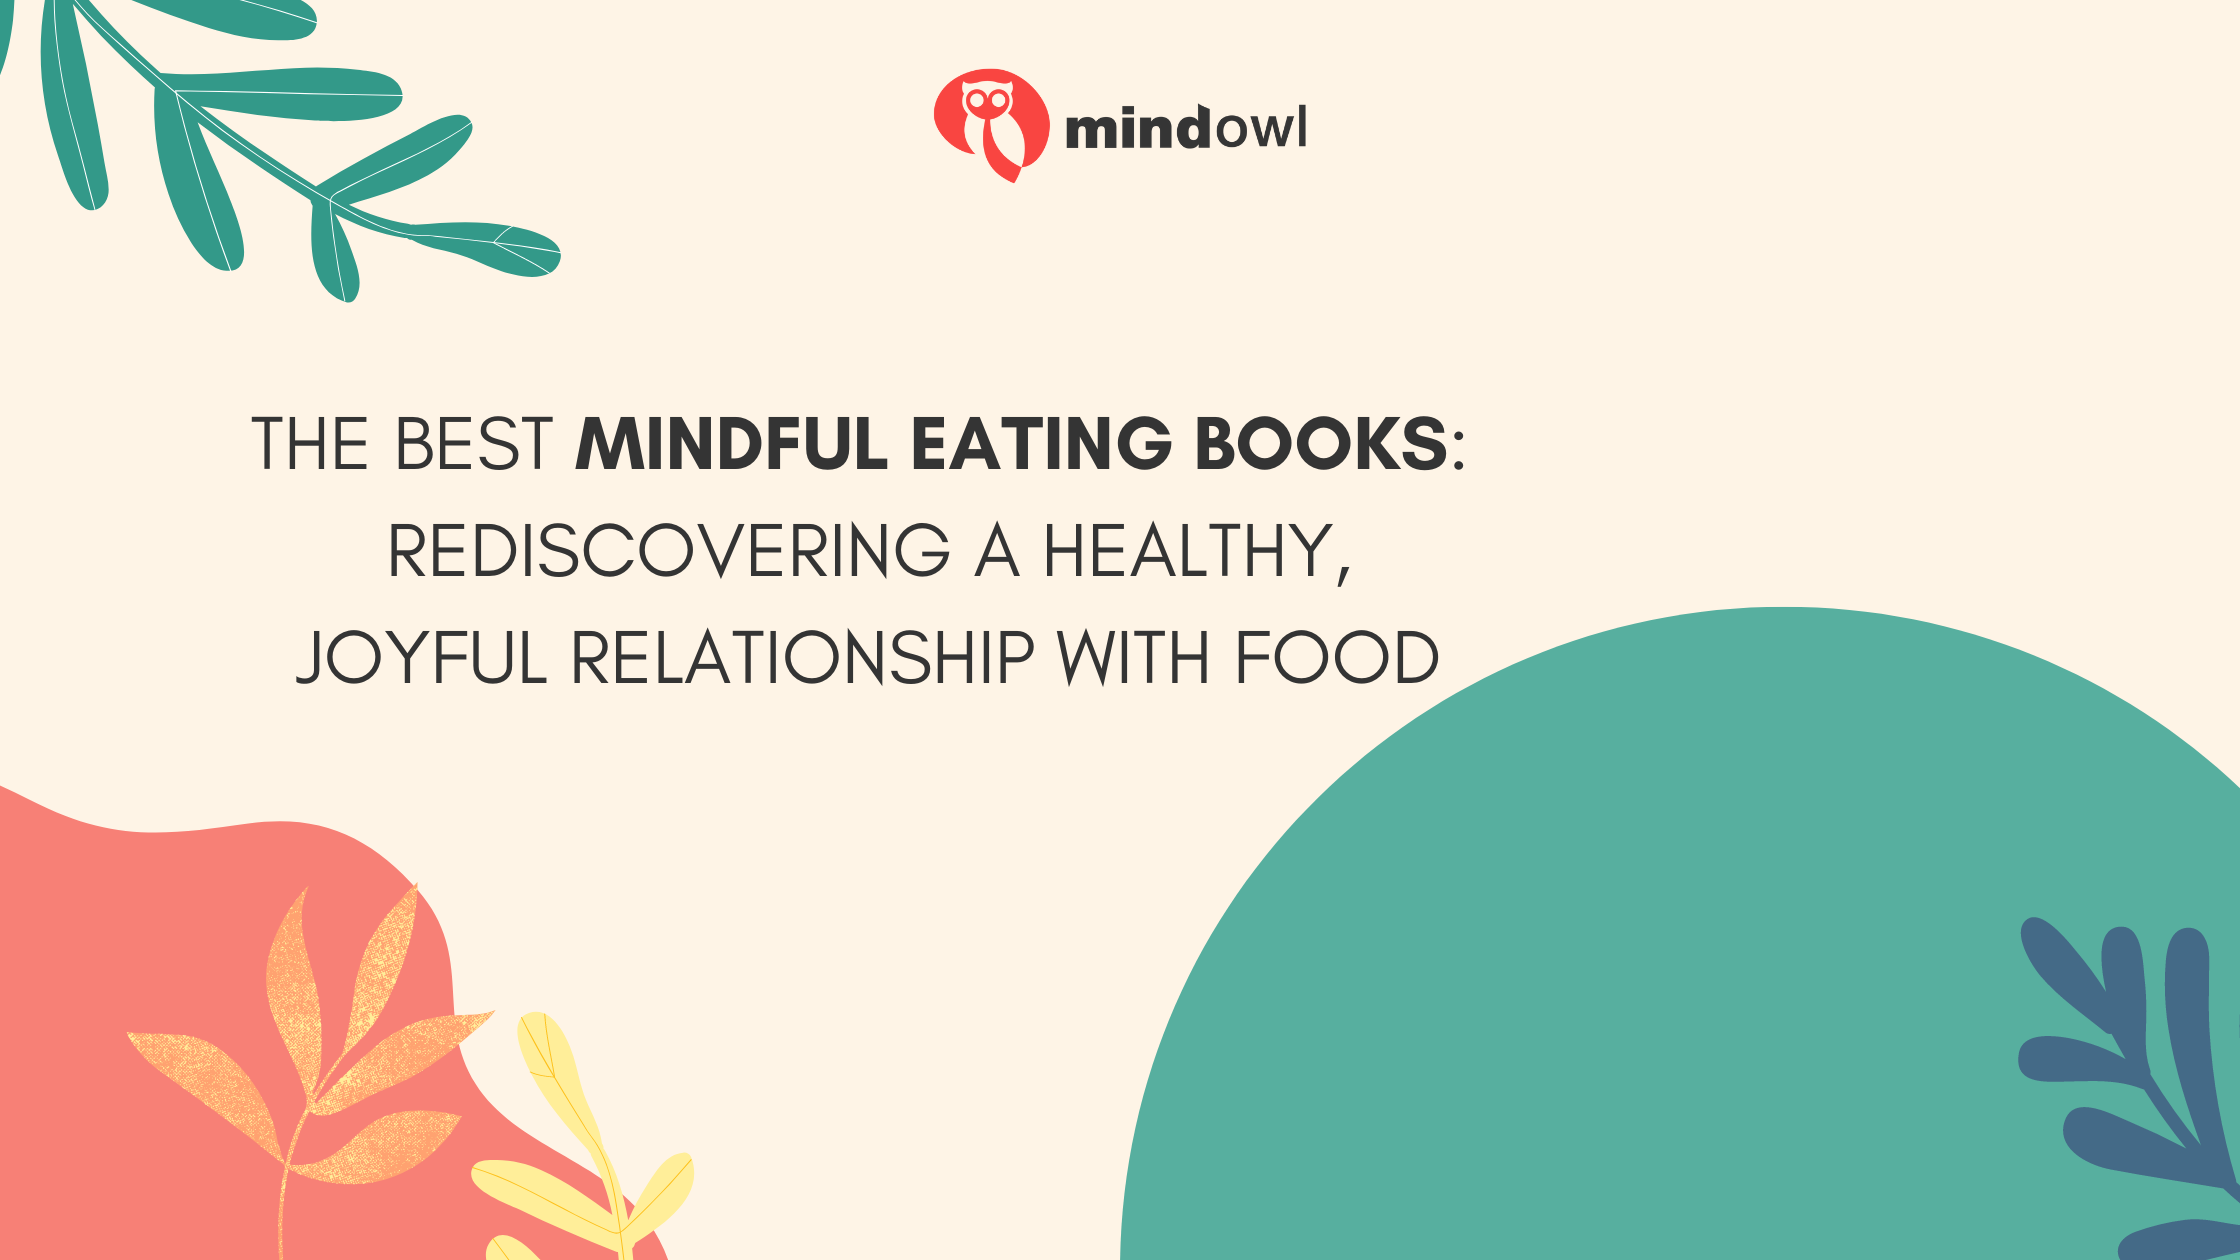 The Best Mindful Eating Books: Rediscovering A Healthy, Joyful Relationship With Food